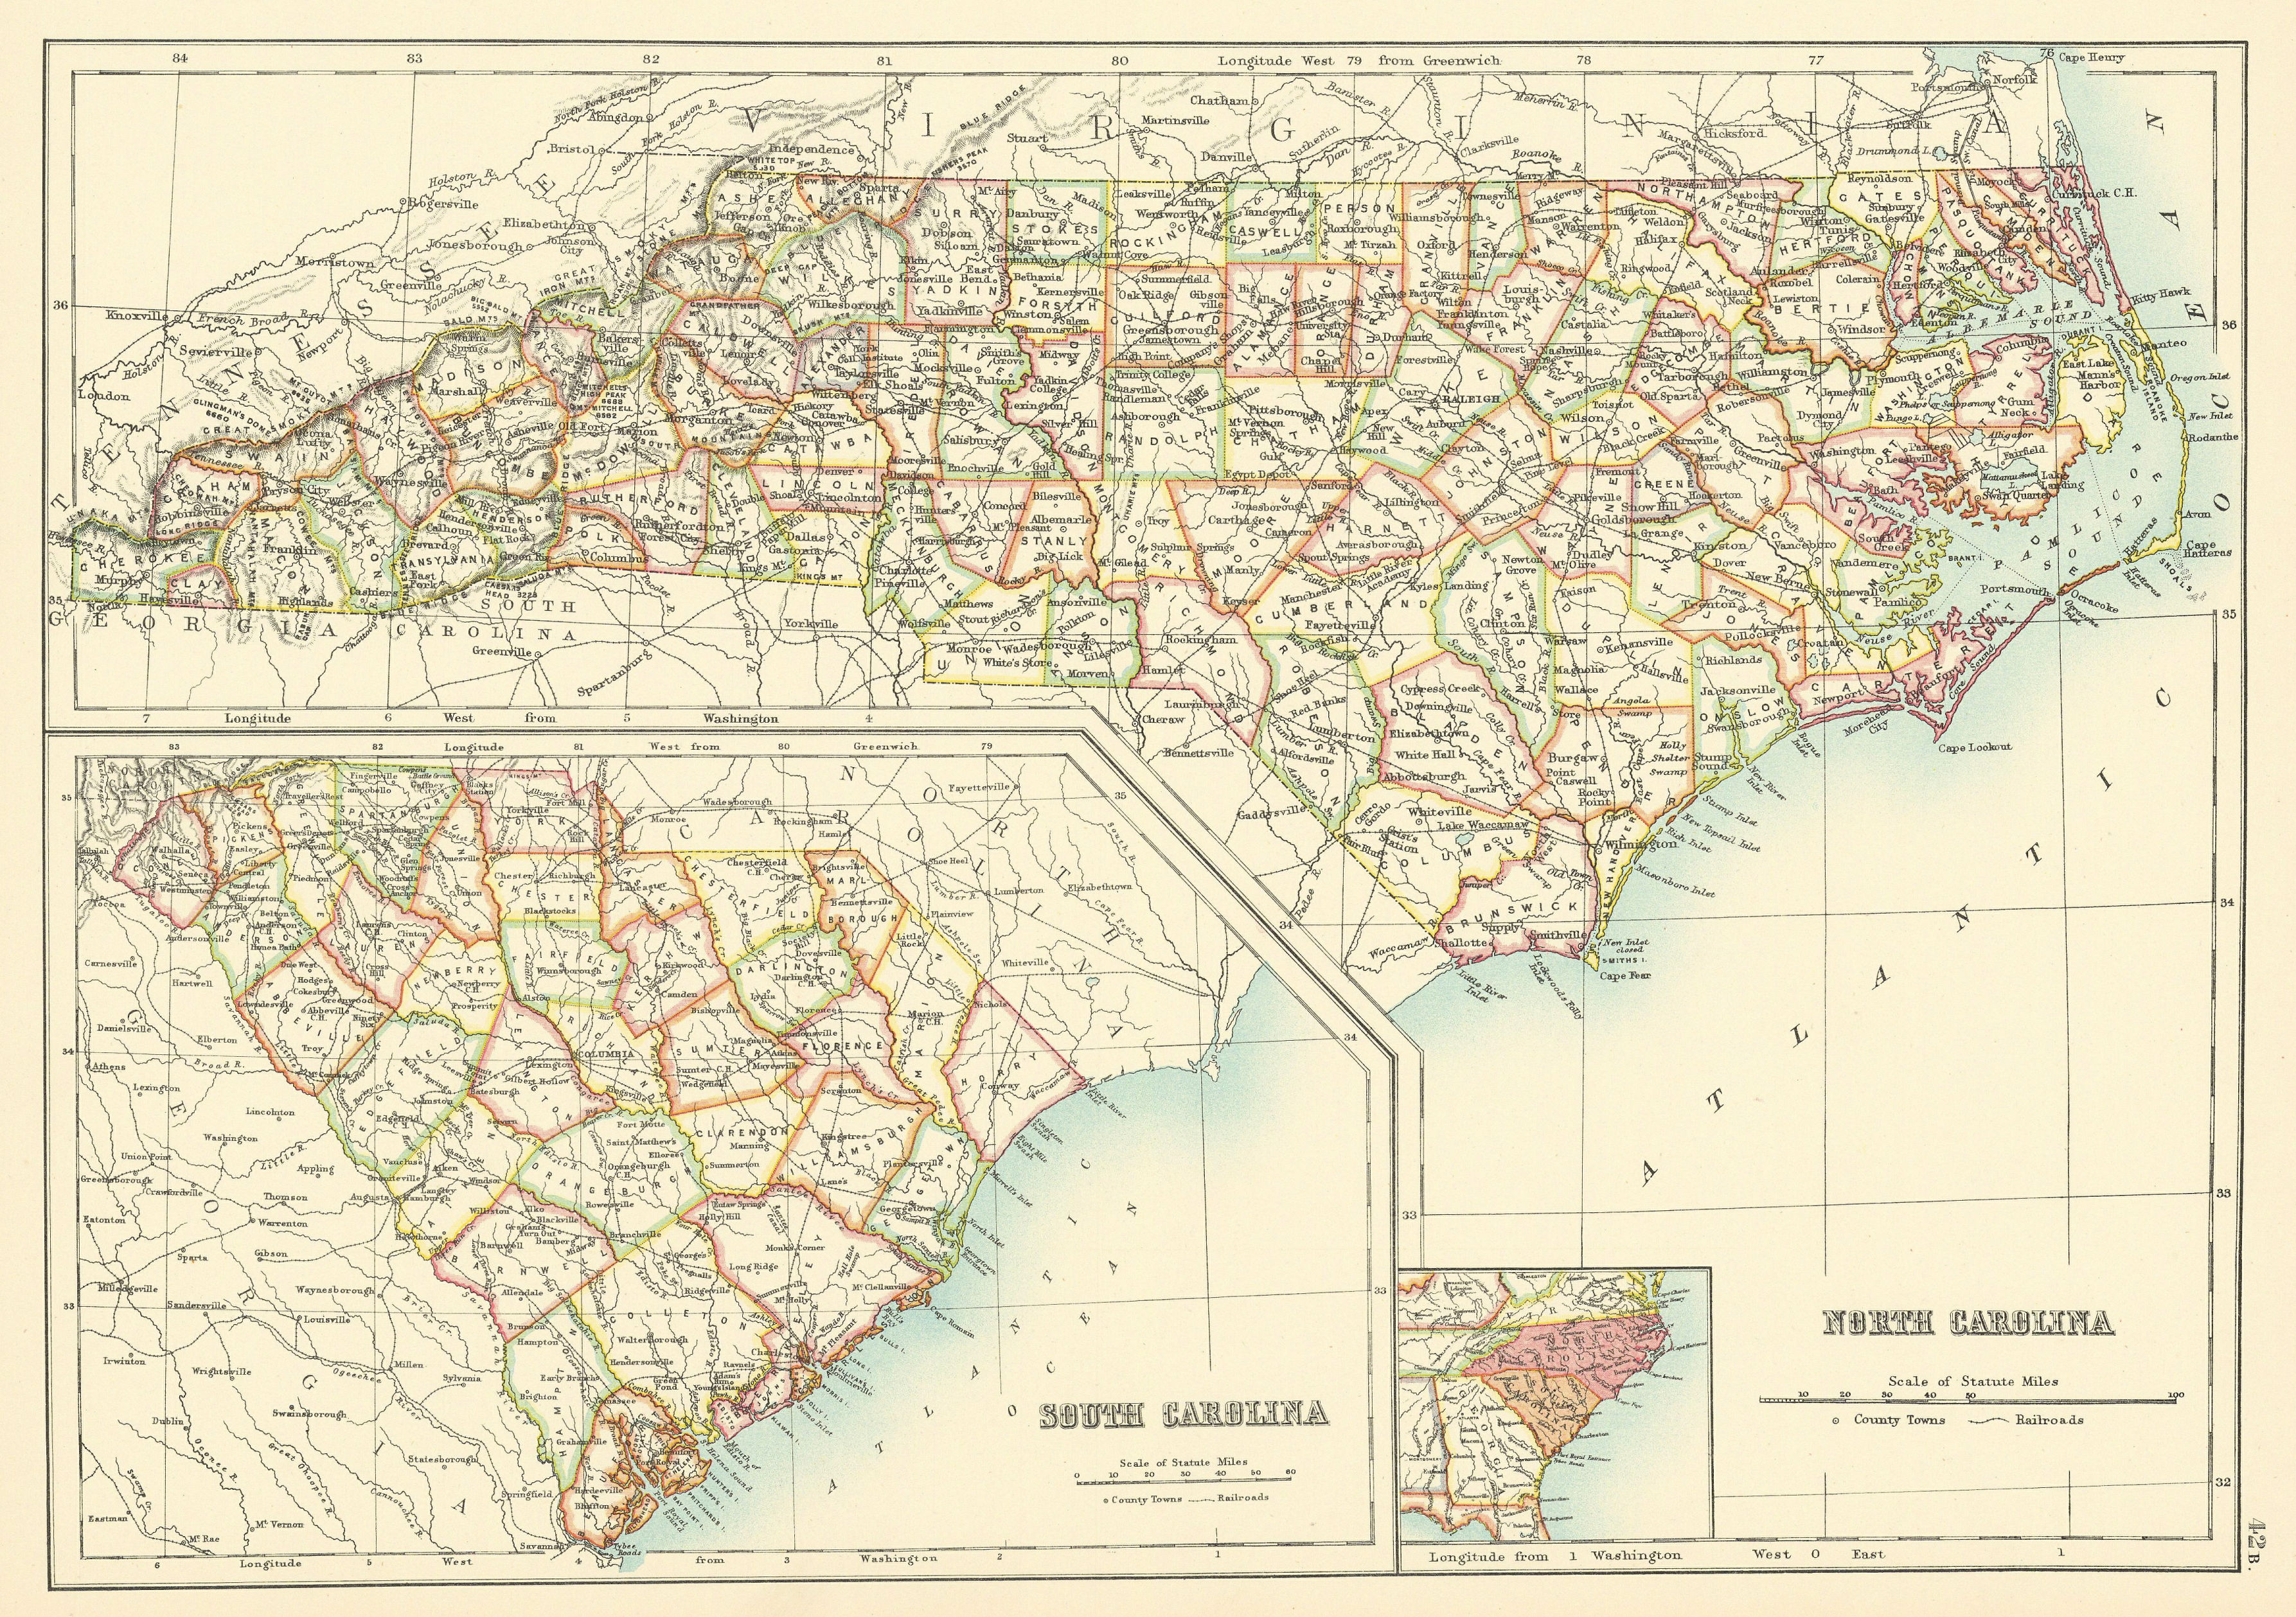 Associate Product North and South Carolina state maps showing counties. BARTHOLOMEW 1898 old